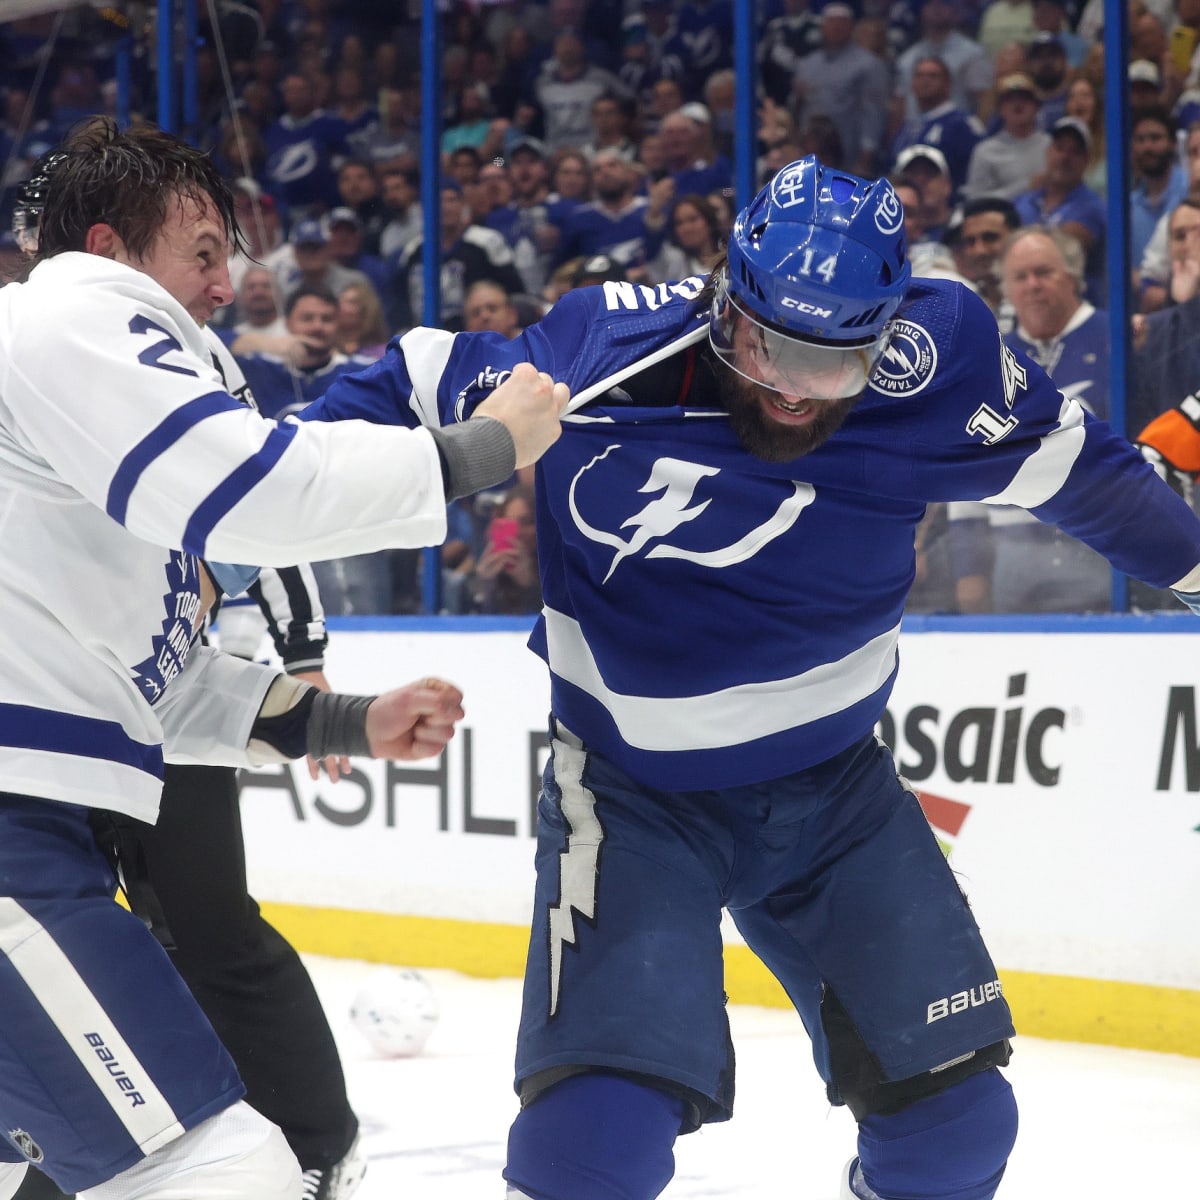 Reilly scores in OT to lift Maple Leafs past Tampa Bay Lightning, 4-3